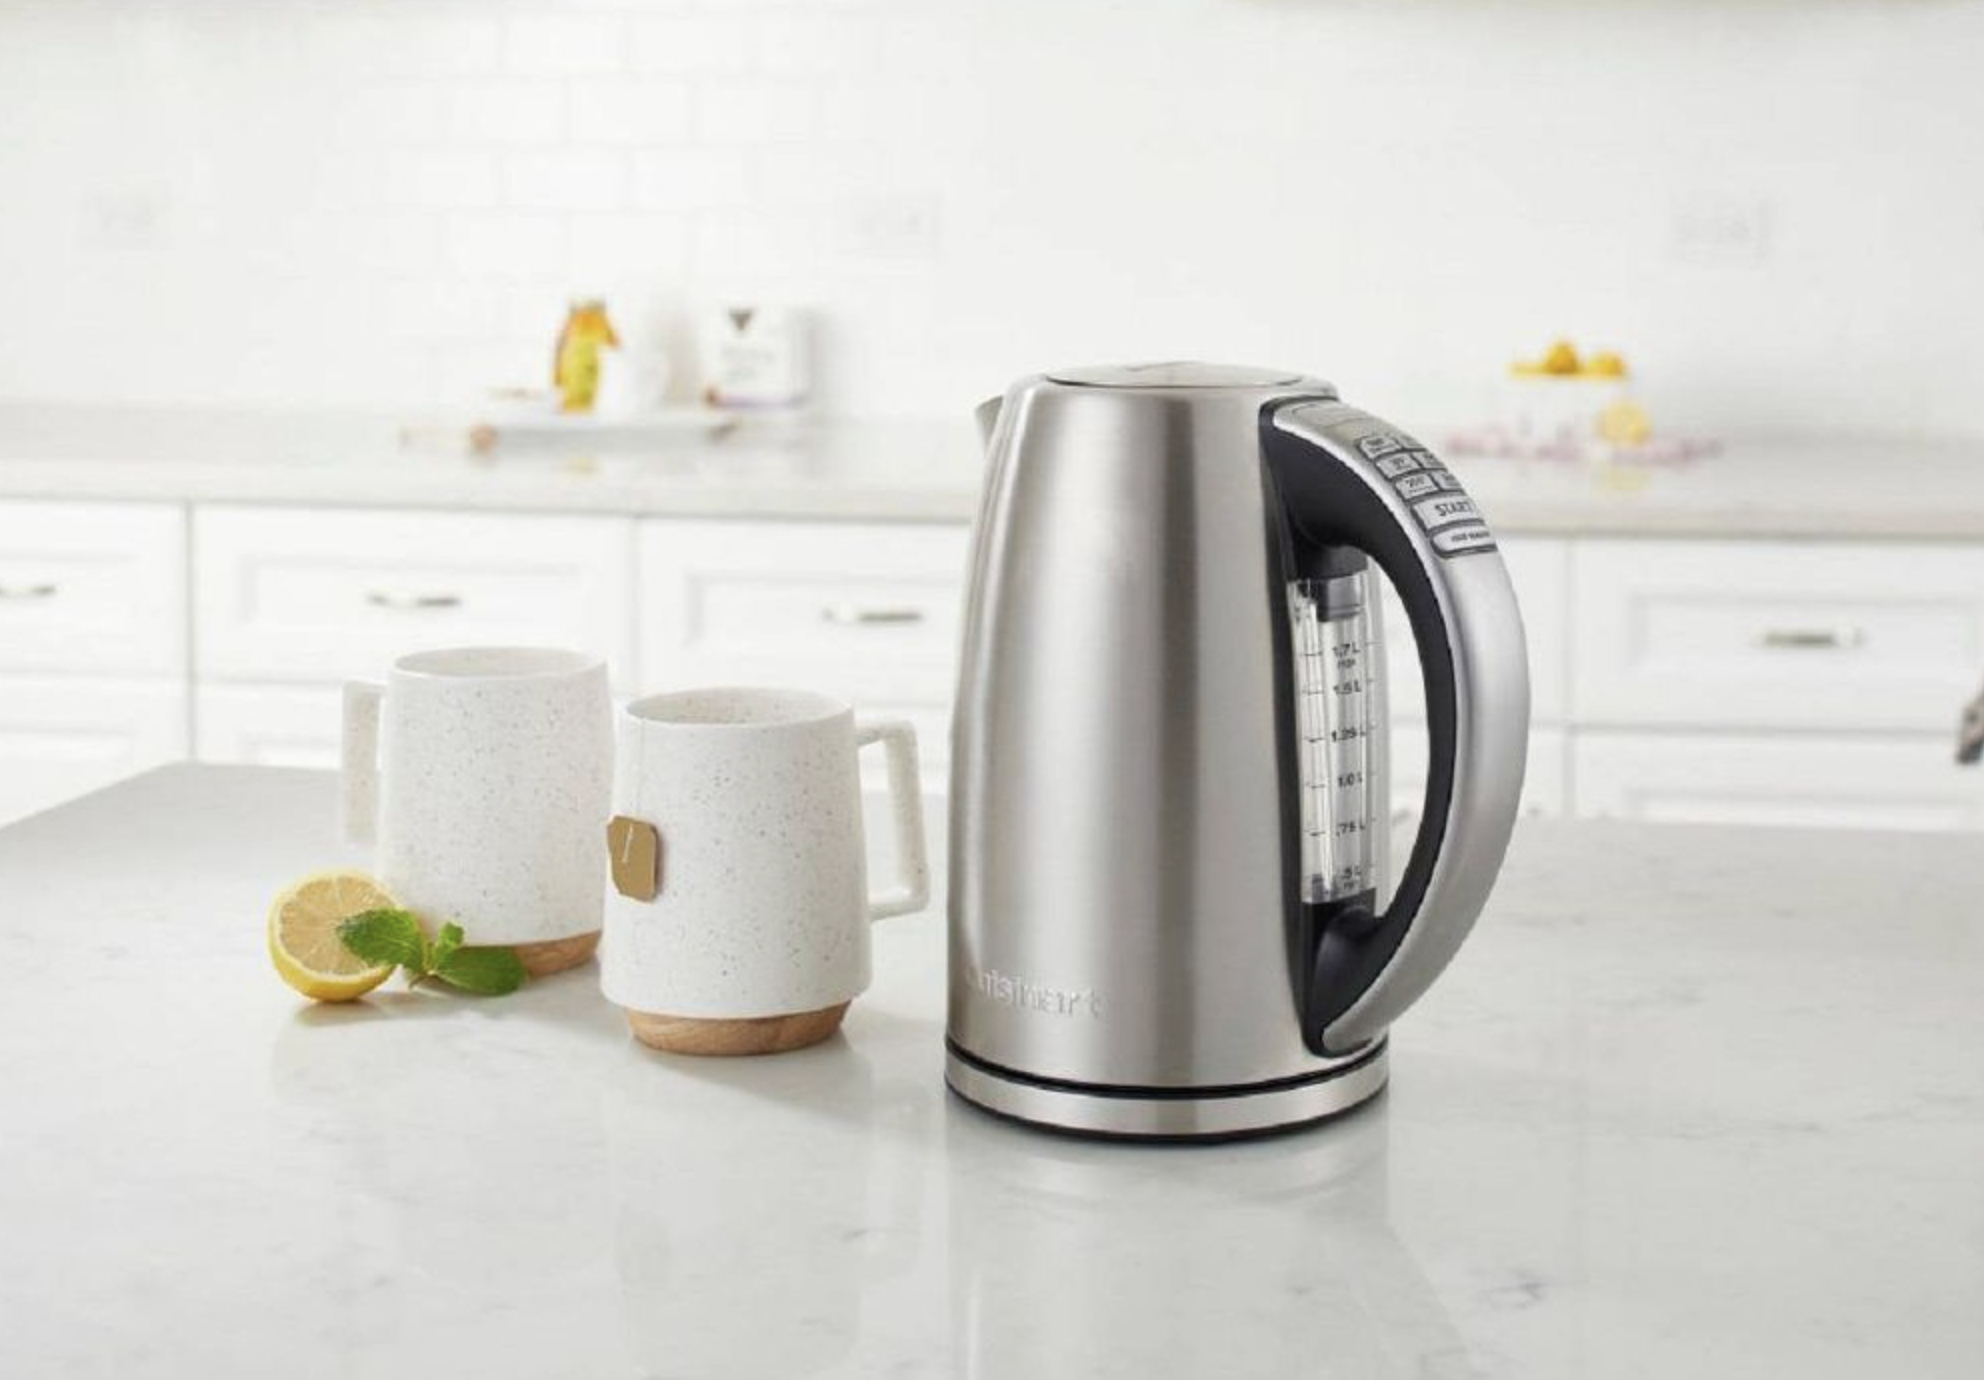 Stainless steel electric kettle on kitchen counter beside two mugs and a sliced lemon